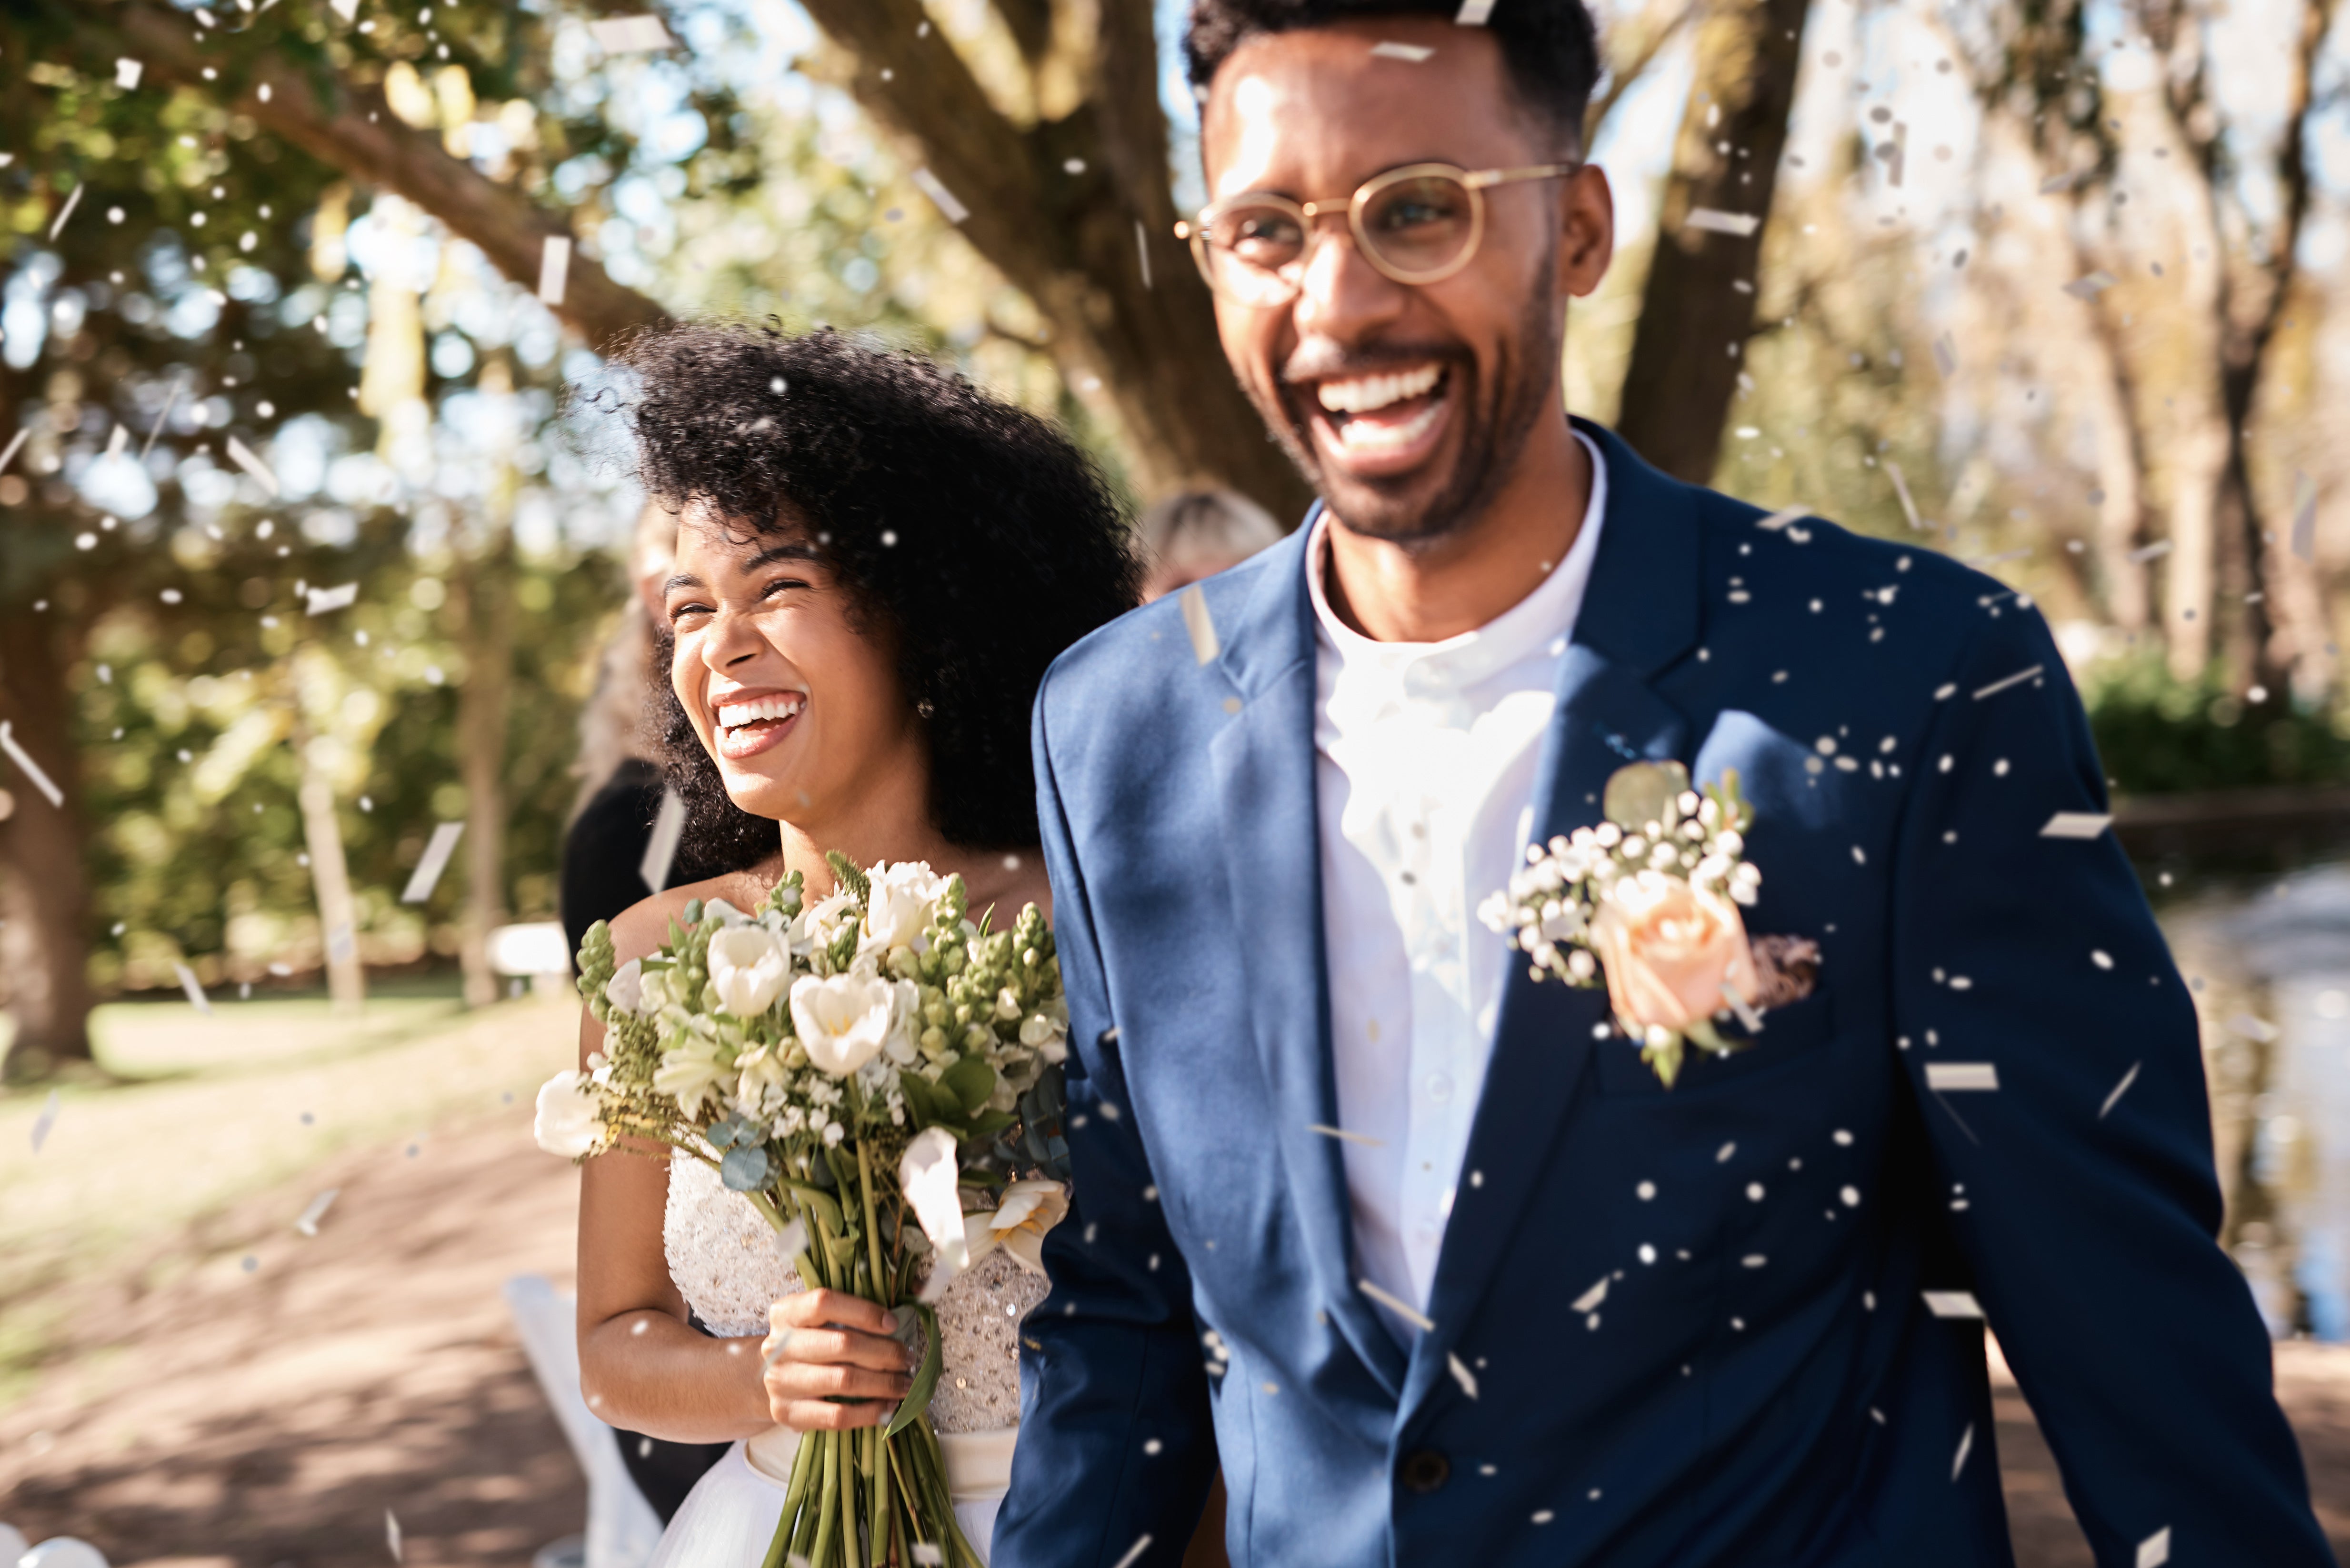 <p>Outdoor weddings are here to stay</p>